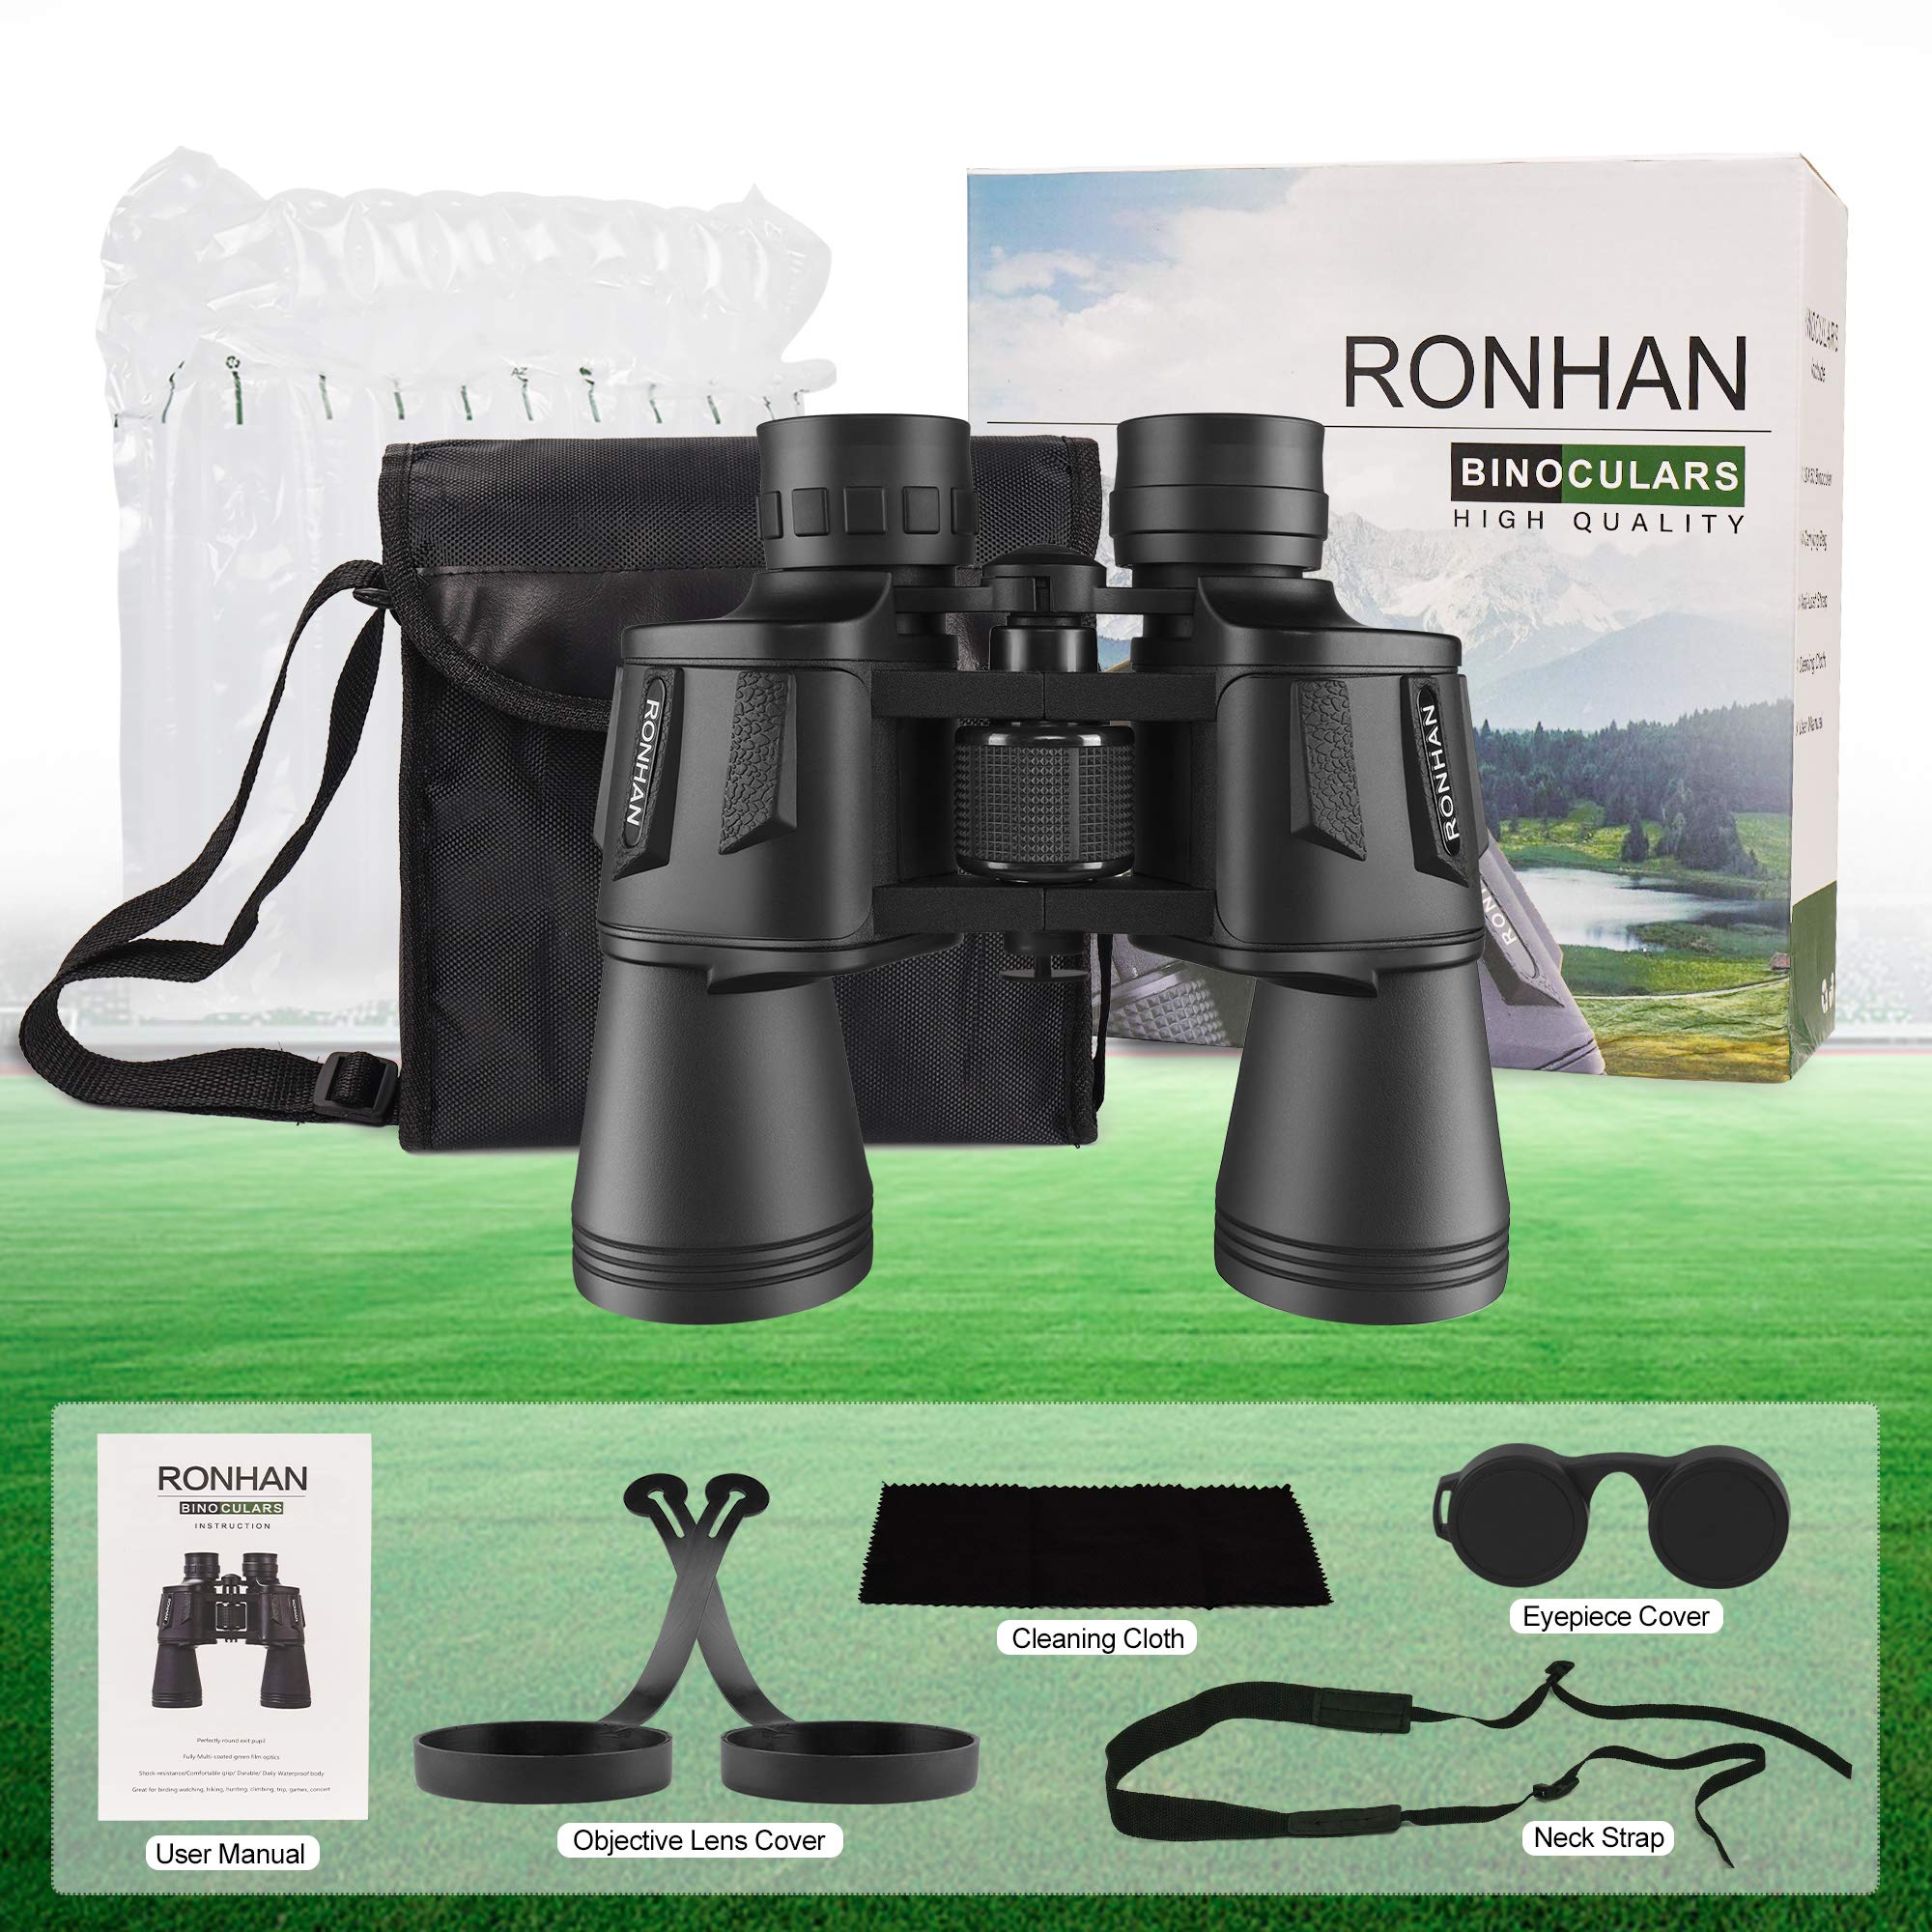 20x50 High Power Binoculars for Adults, Military Compact HD Professional/Daily Waterproof Binoculars Telescope for Bird Watching Travel Hunting Football Games Stargazing with Carrying Case and Strap